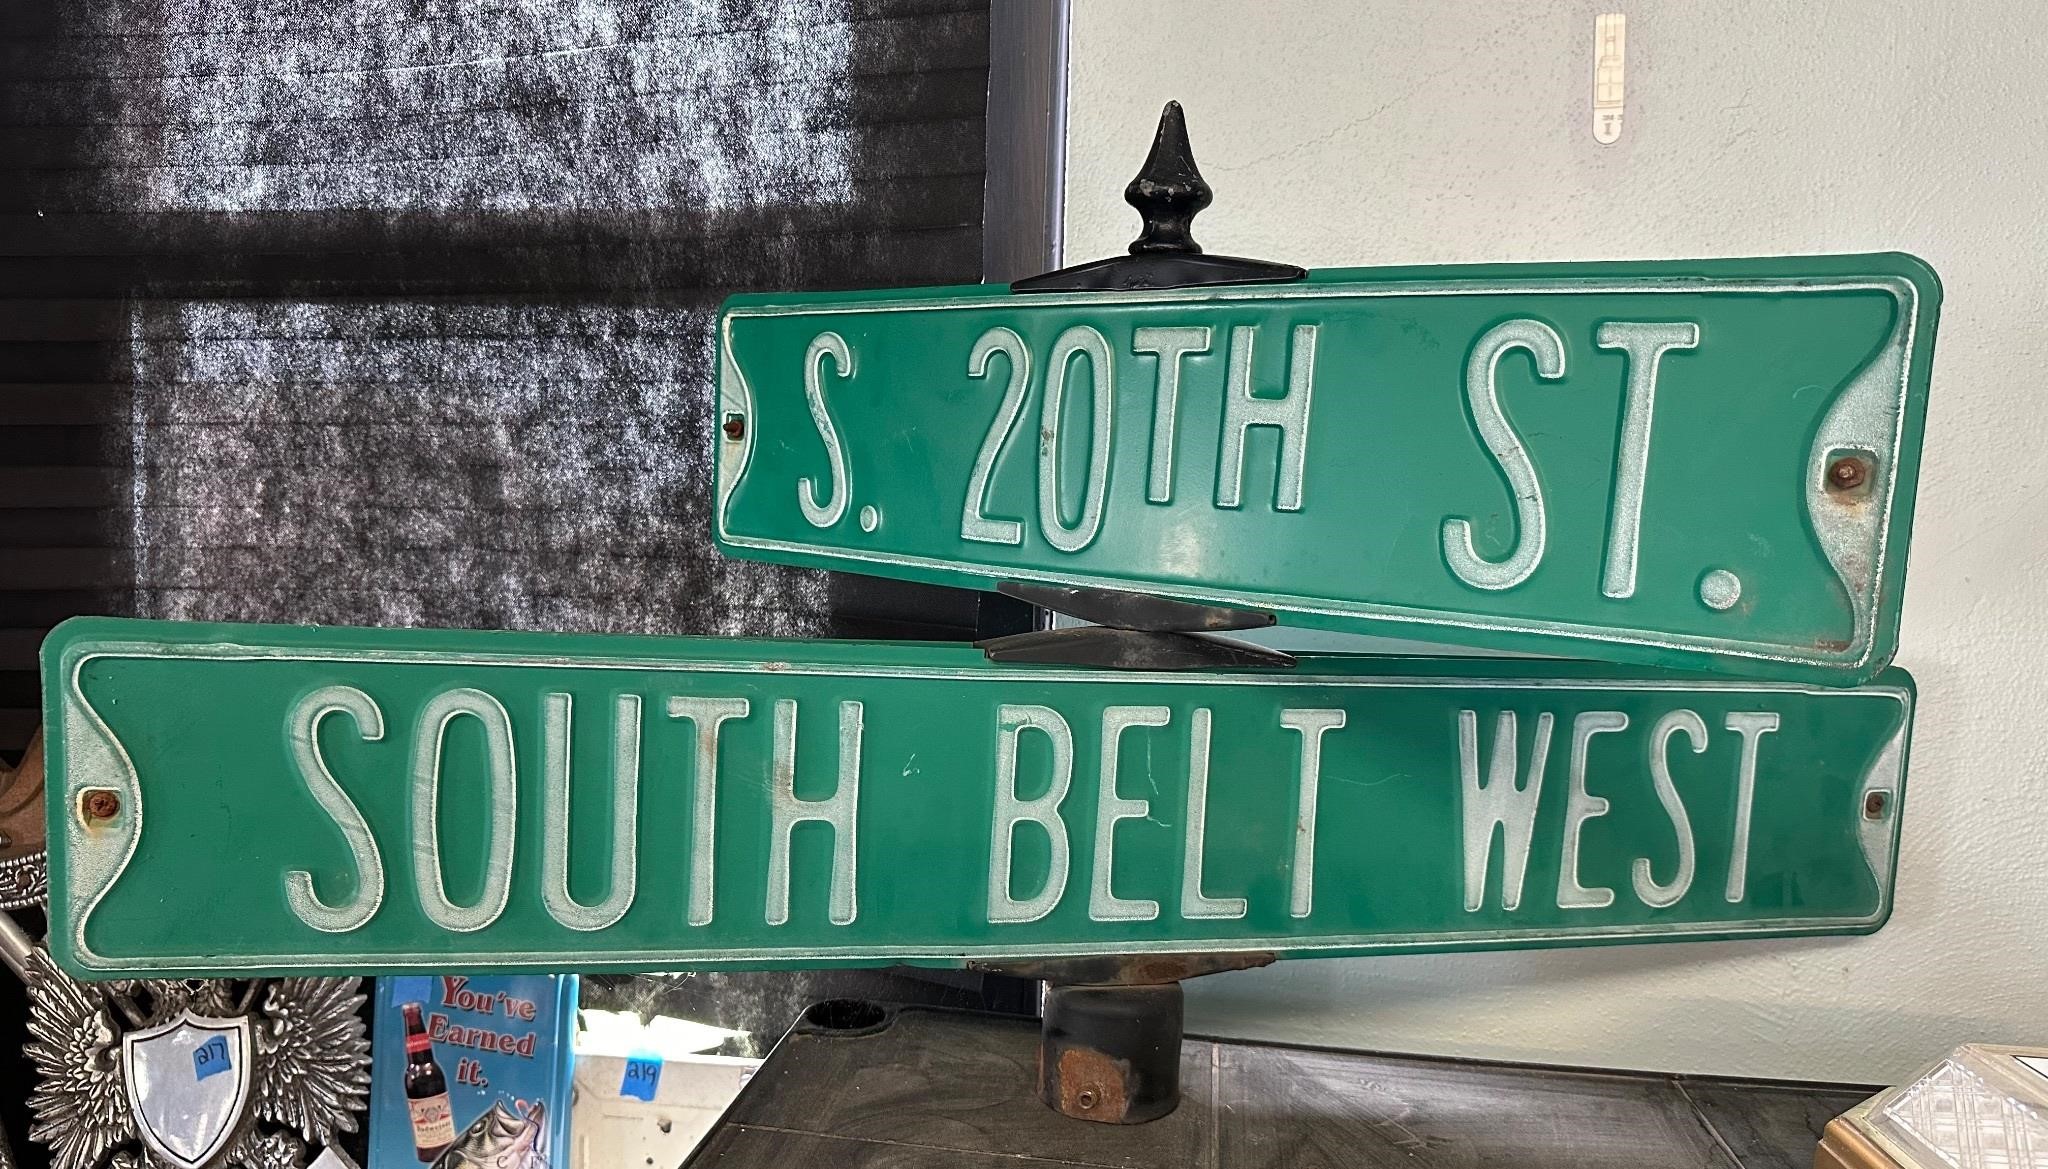 Double sided street signs